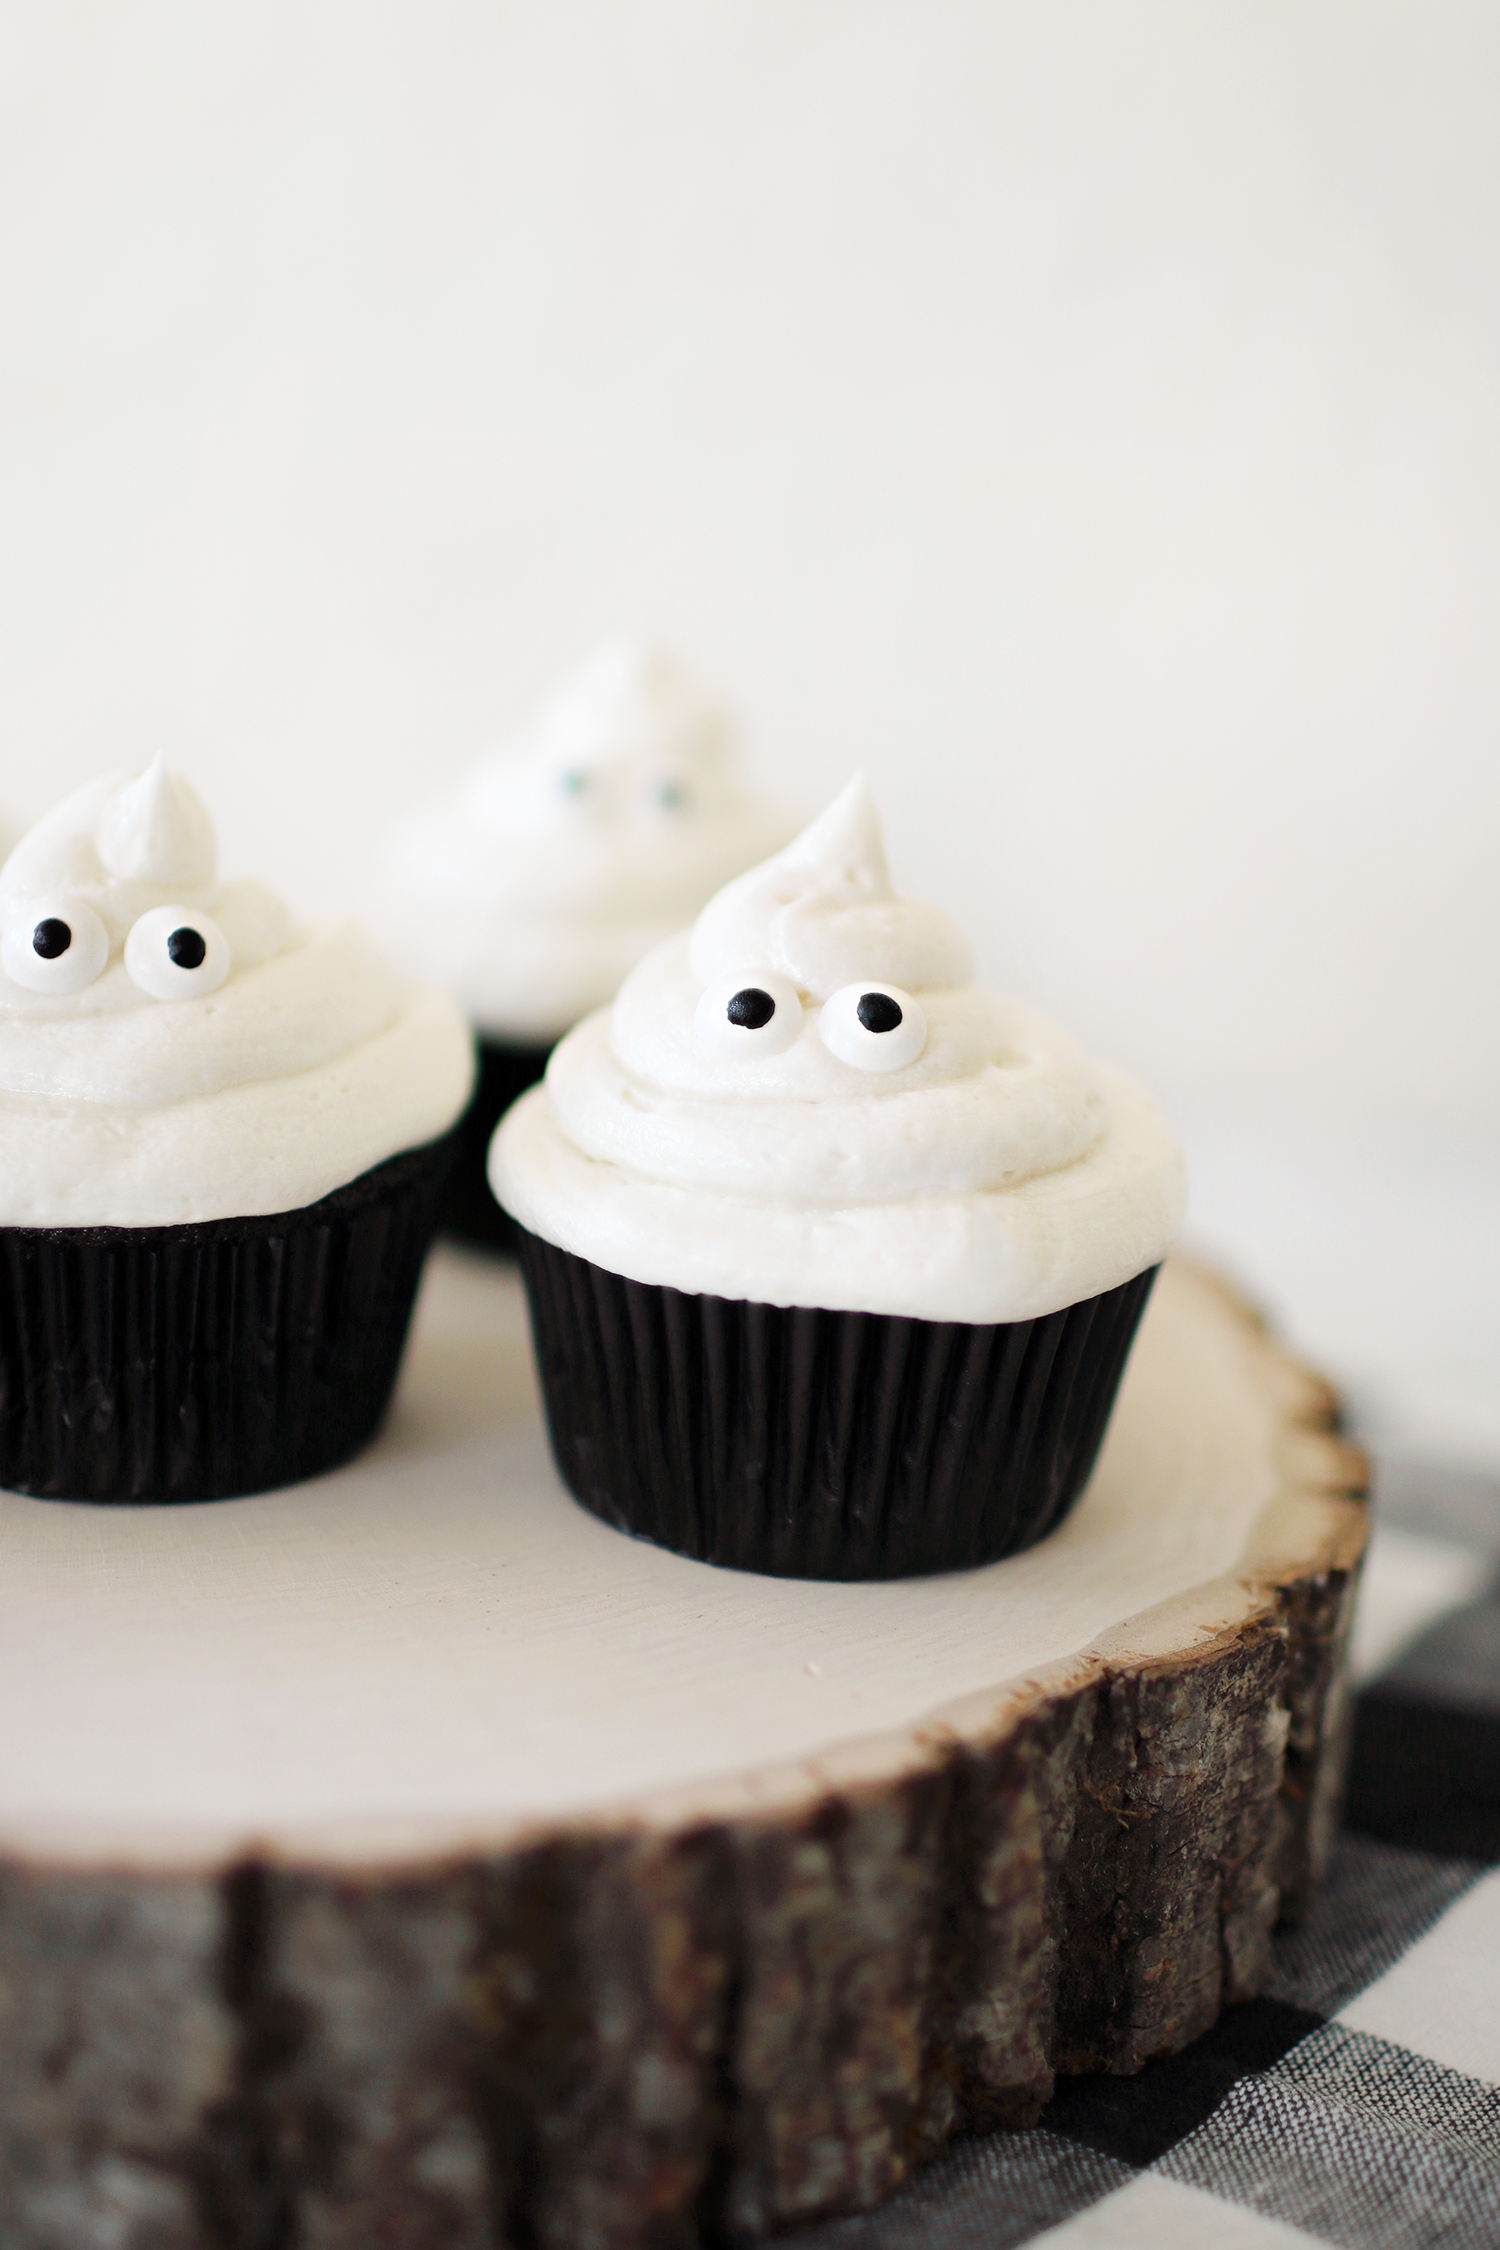 Black velvet and vanilla butter cream ghost cupcakes that our family loves to make for the Halloween festivities. Simple recipes and easy decorating make these cupcakes a hit for anyone who gets to make them. They are also delicious for all who get to enjoy them. Catch the entire recipe for our Ghost in the Graveyard cupcakes over at Haus of Layne! #HalloweenFood #HalloweenRecipe #HalloweenFoodIdeas #HalloweenTreats #Cupcakes #CupcakeRecipe #ButtercreamFrosting #BlackVelvetCake 